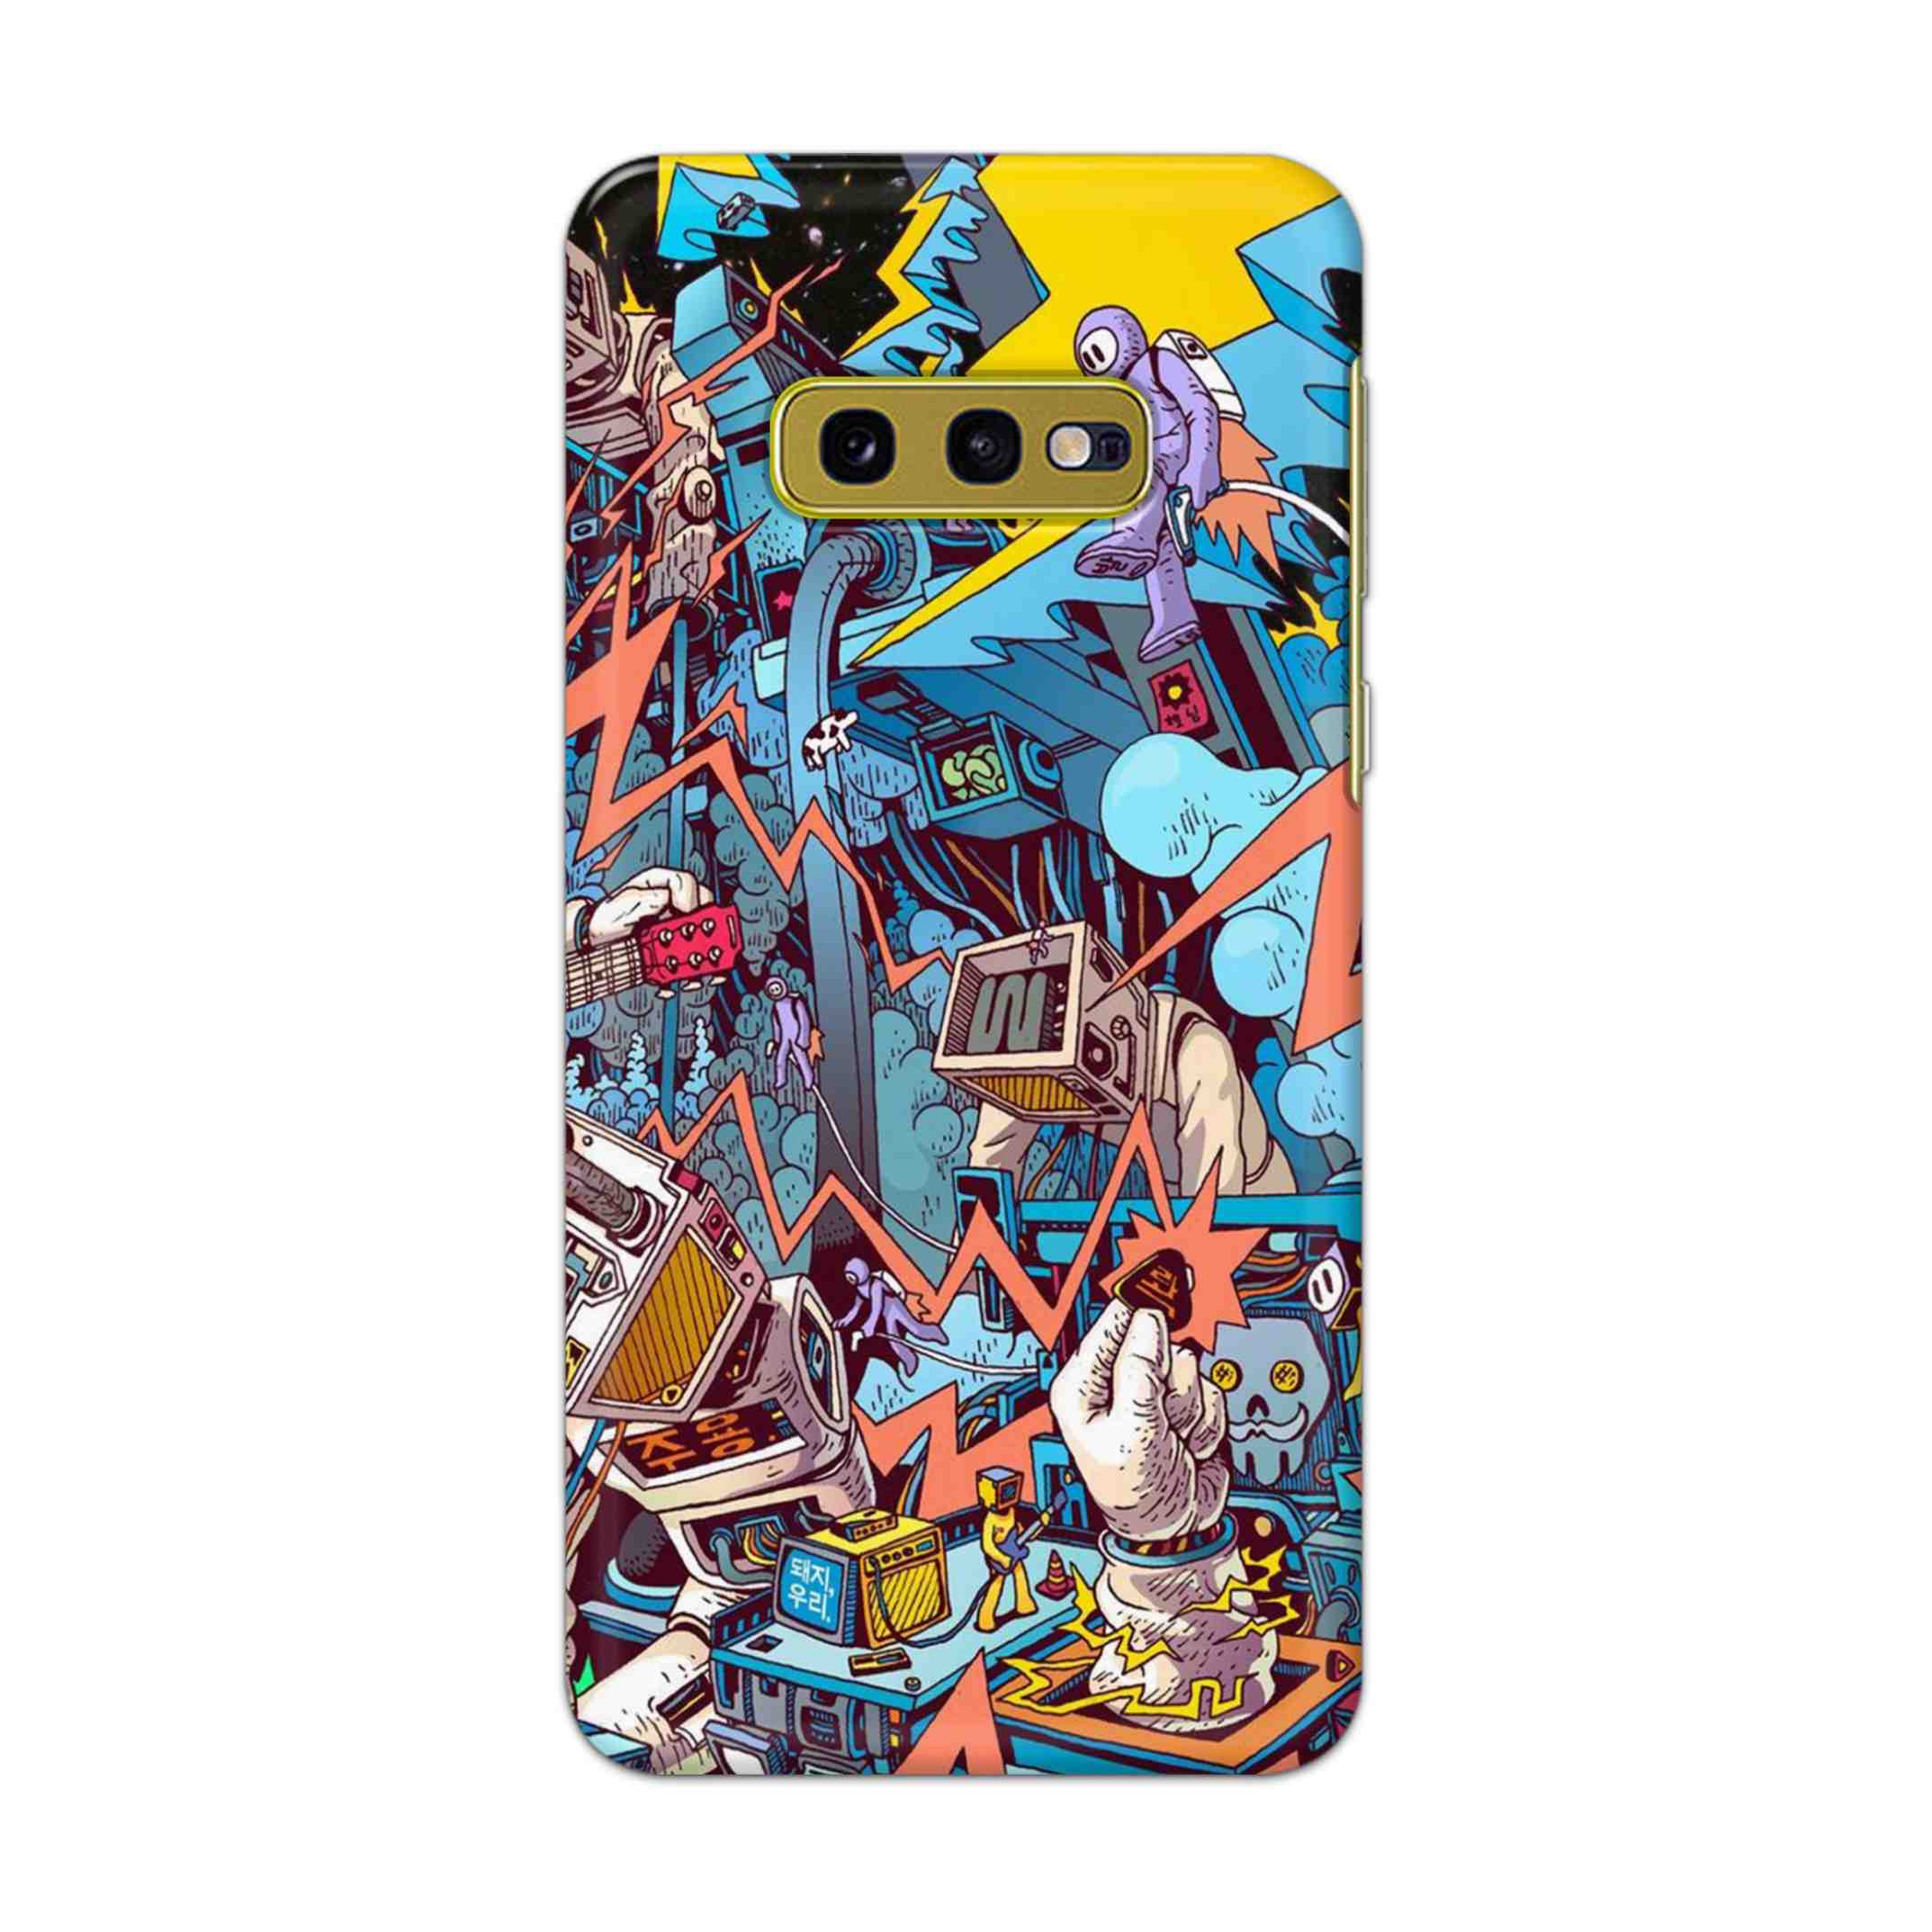 Buy Ofo Panic Hard Back Mobile Phone Case Cover For Samsung Galaxy S10e Online